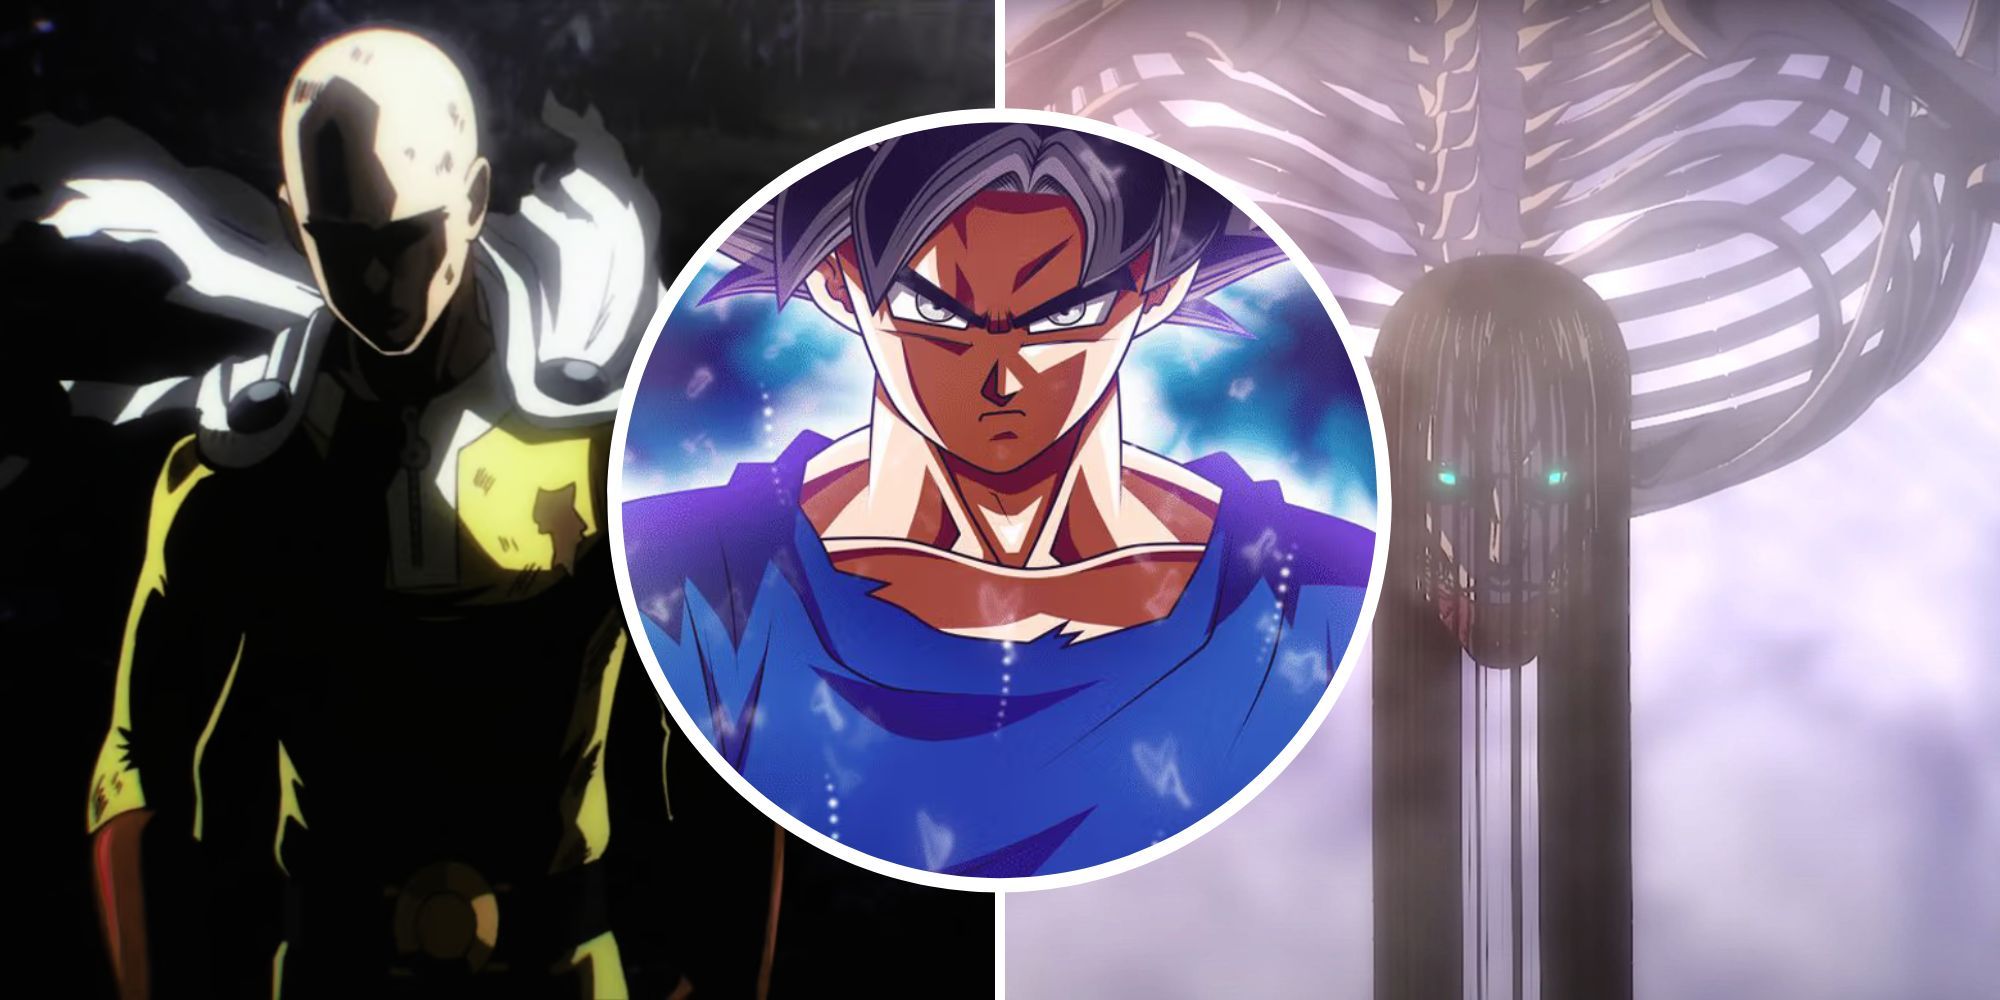 10 Anime characters who can destroy the universe effortlessly